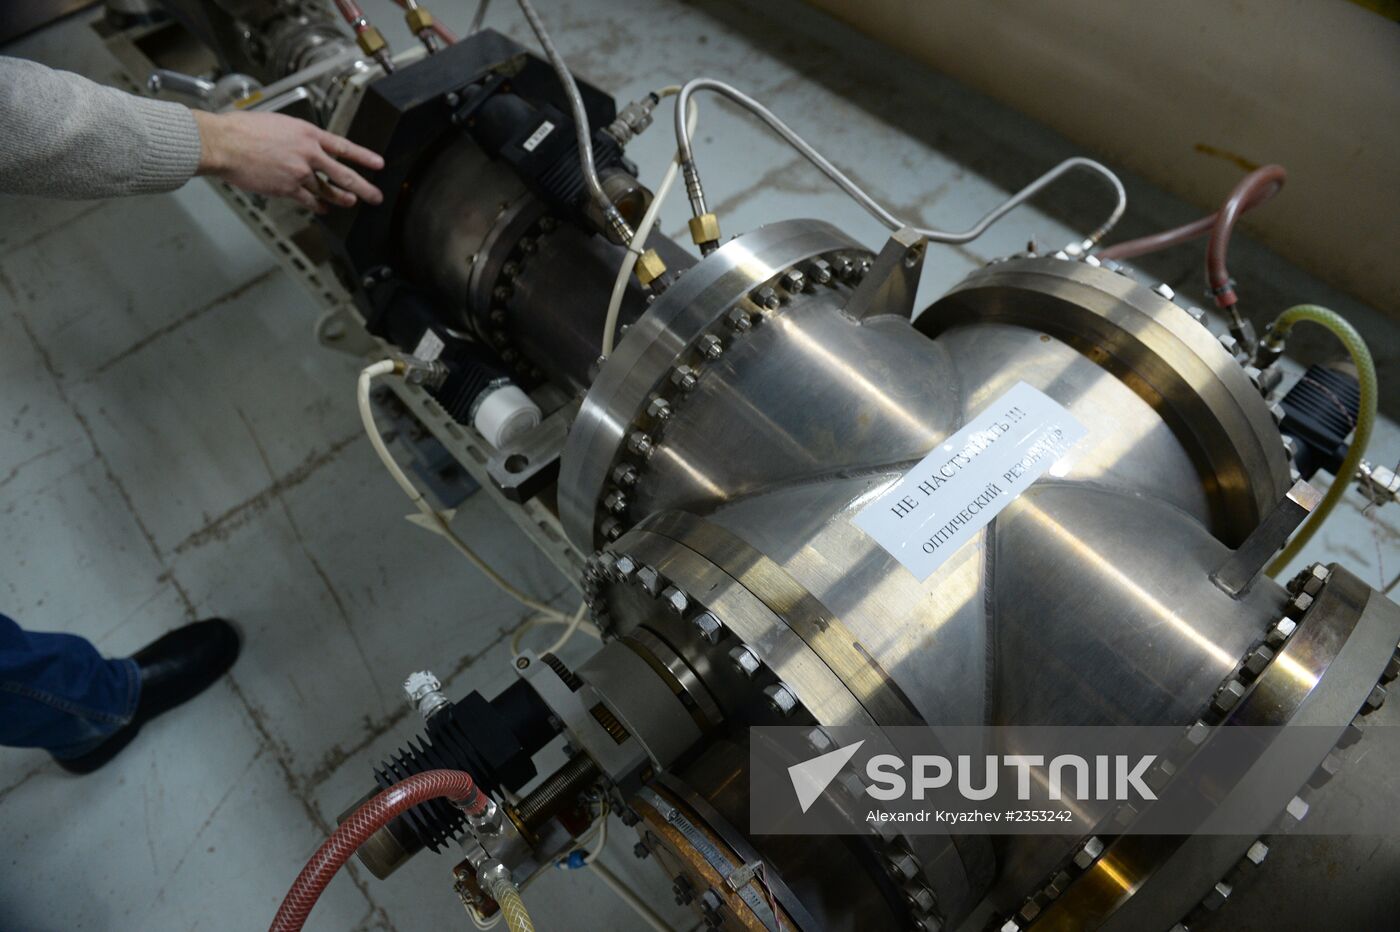 Experimental production at Institute of Nuclear Physics in Novosibirsk